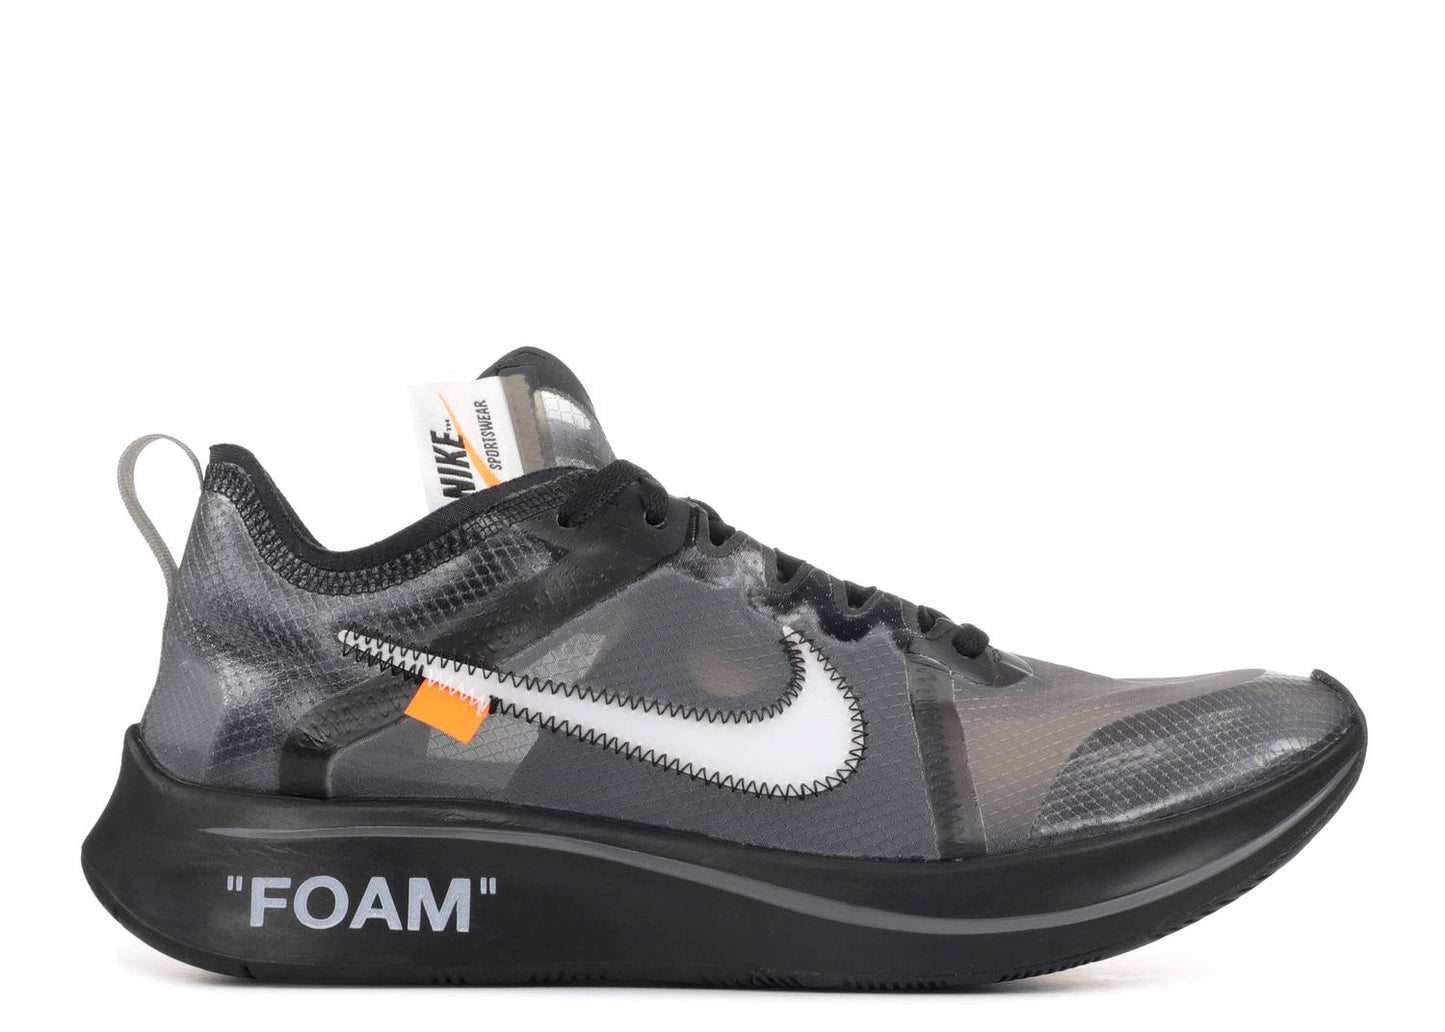 Nike Off White Zoom Fly